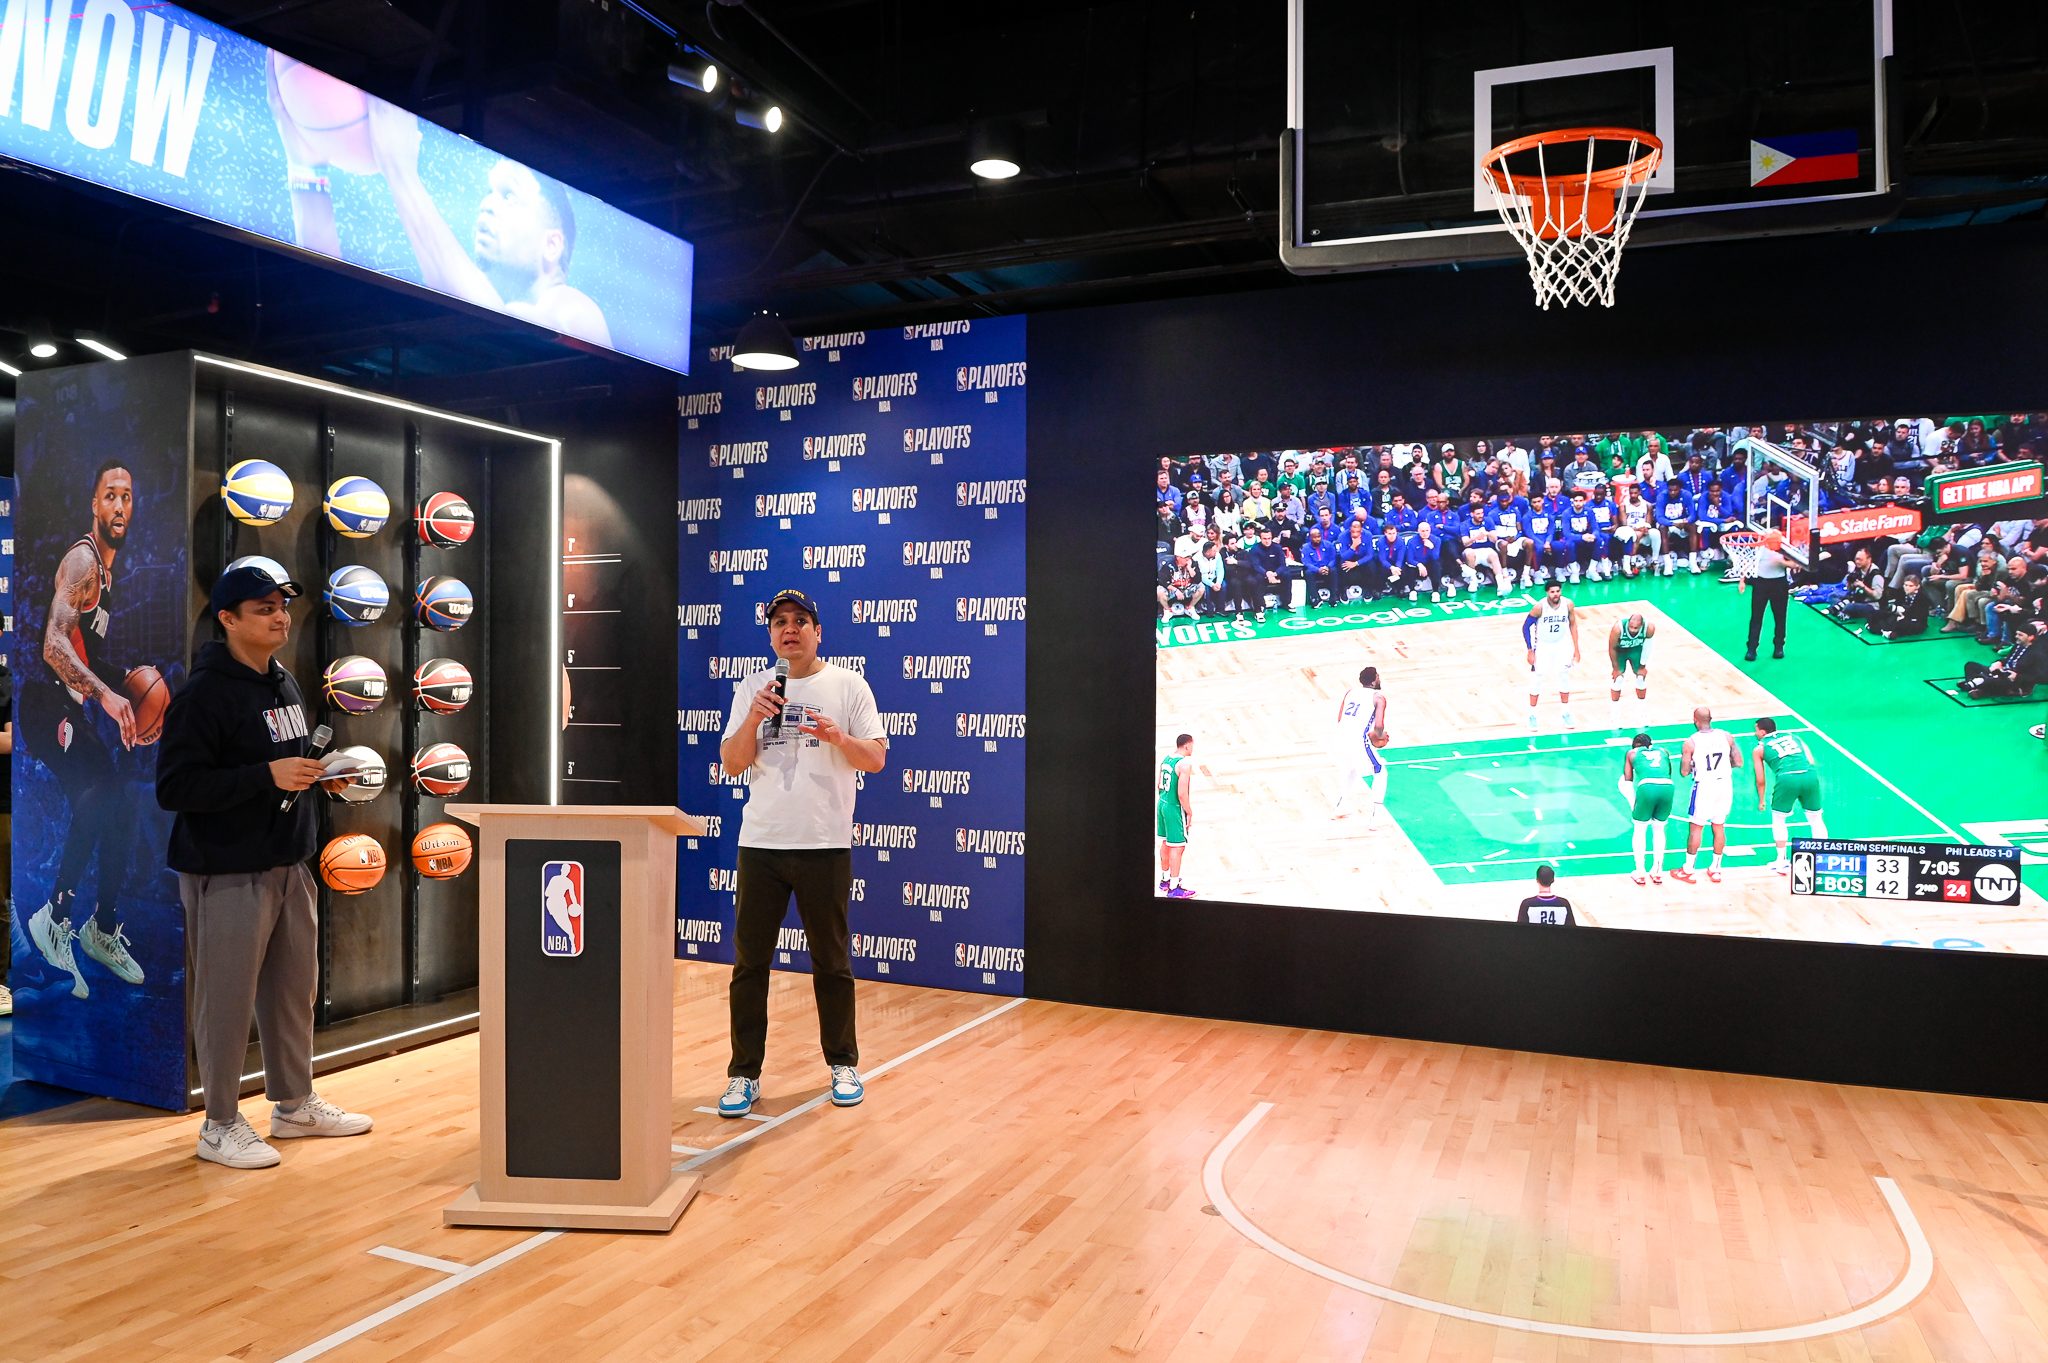 NBA online stores spread across APAC - Inside Retail Asia